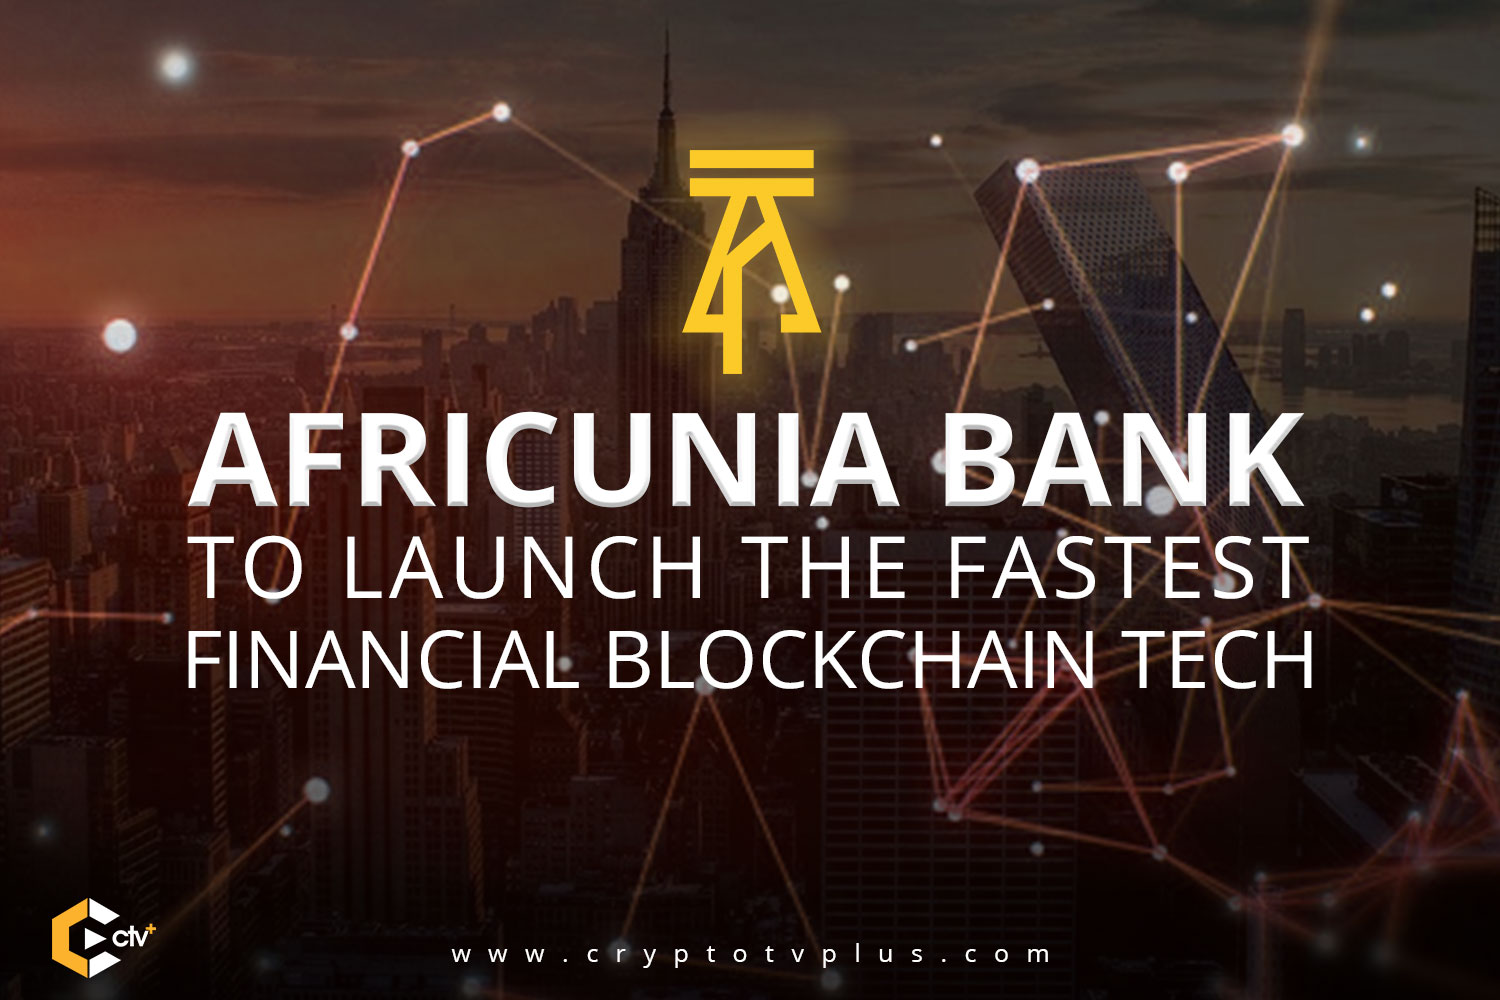 AFRICUNIA Bank will be 100% fully Digital Crowdfunded Open Bank based on the Blockchain Technology 4.0 and that this Blockchain Digital Bank